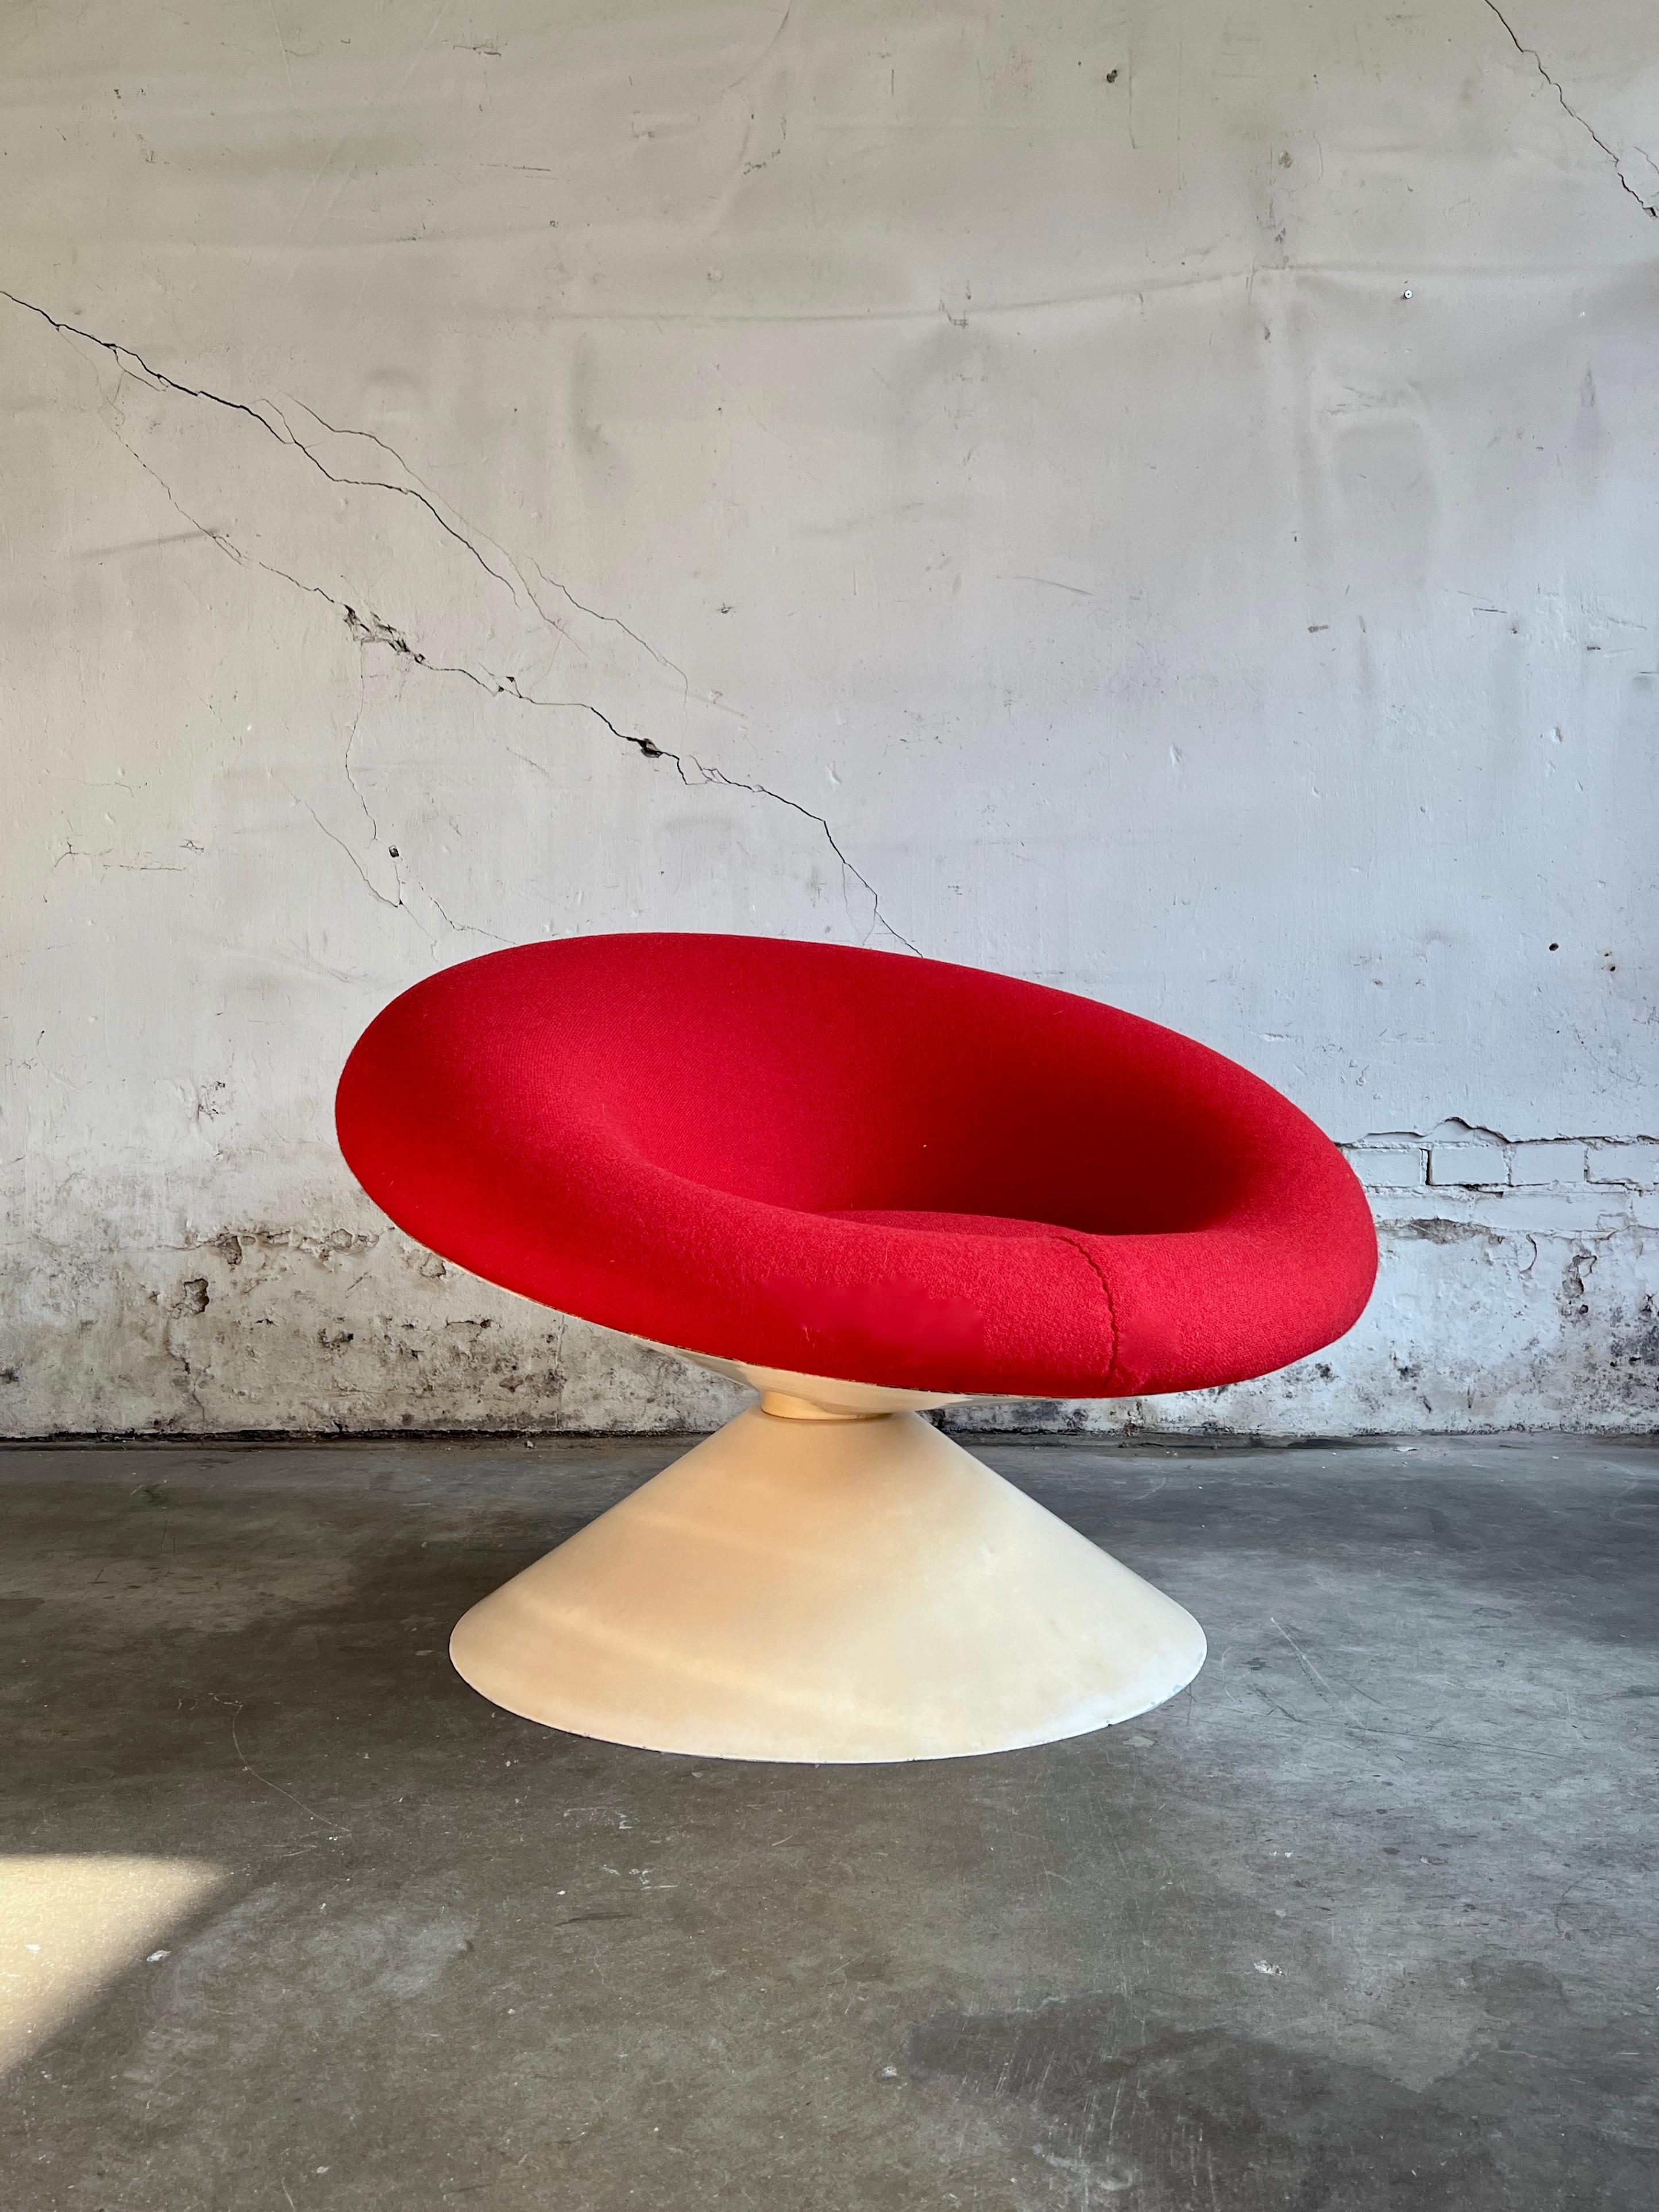 Highly collectible lounge chair 'Diabolo' by Ben Swildens and produced by Stabin Bennis in Woerden, the Netherlands, in the sixties. EXTREMELY RARE!
 
Two fiber glass cones on top of each other form the characteristic diabolo shape of this design.